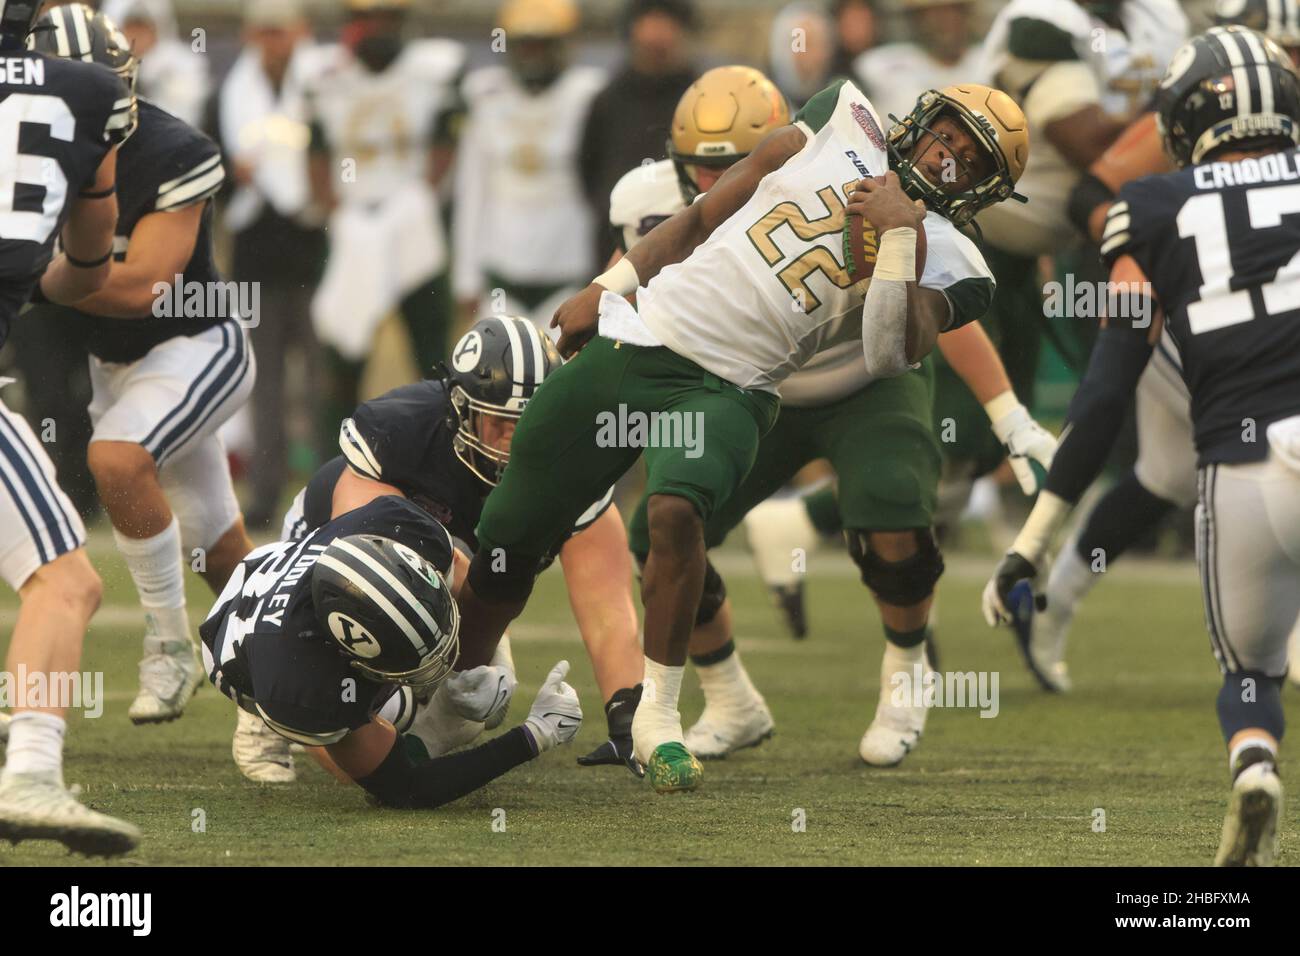 UAB Blazers running back DeWayne McBride (22) is tripped up by Brigham Young Cougars linebacker Max Tooley (31) during the Radiance Technologies Indep Stock Photo